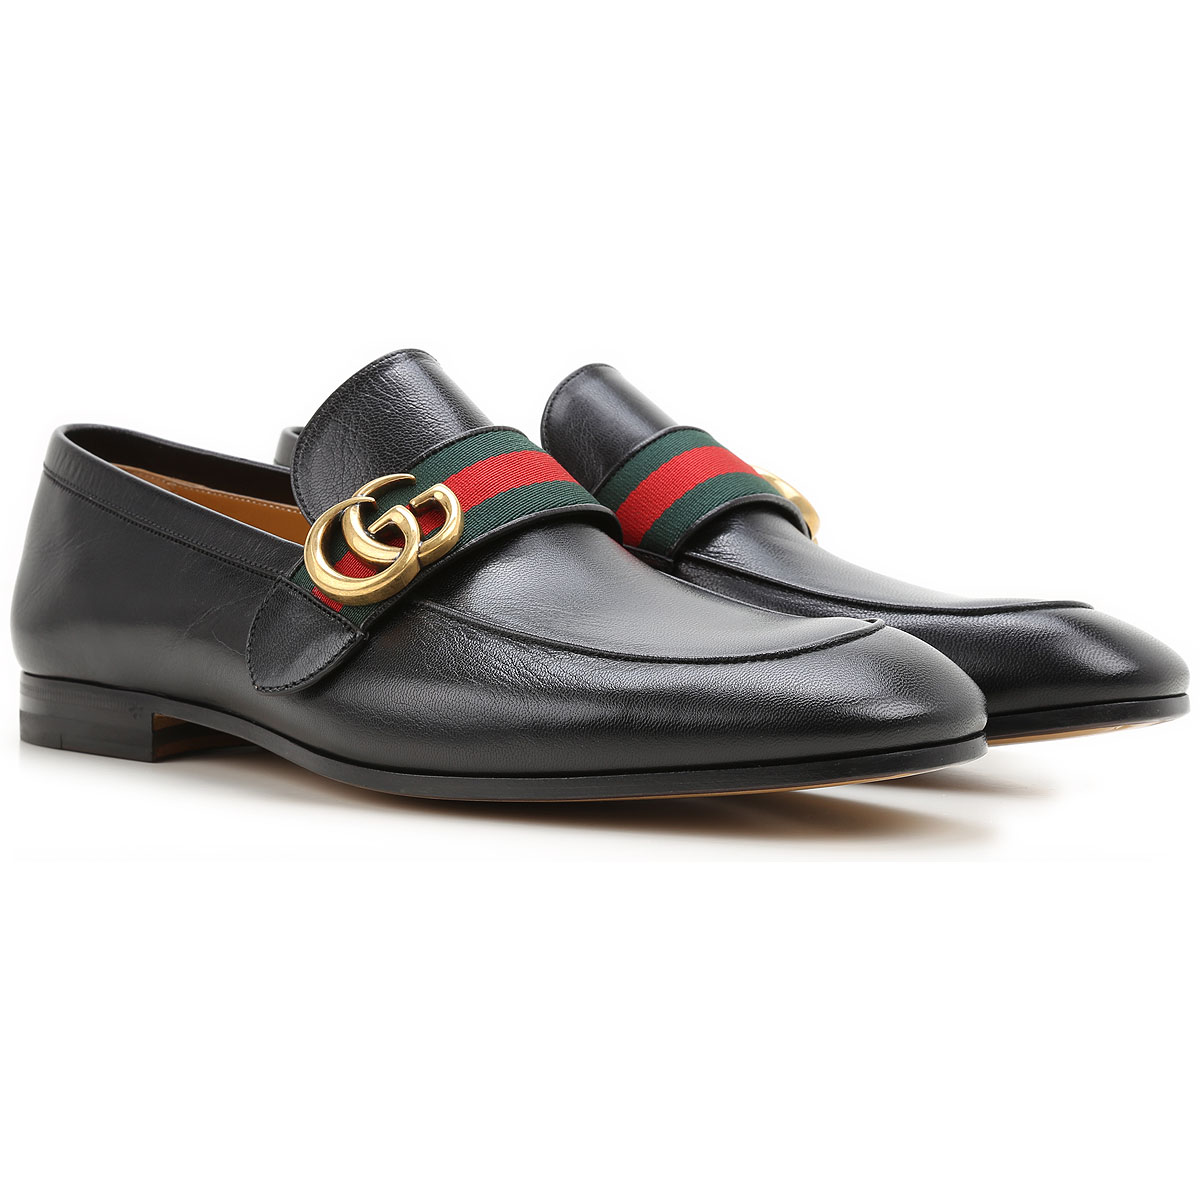 Mens Shoes Gucci, Style code: 428609-d3vn0-1060